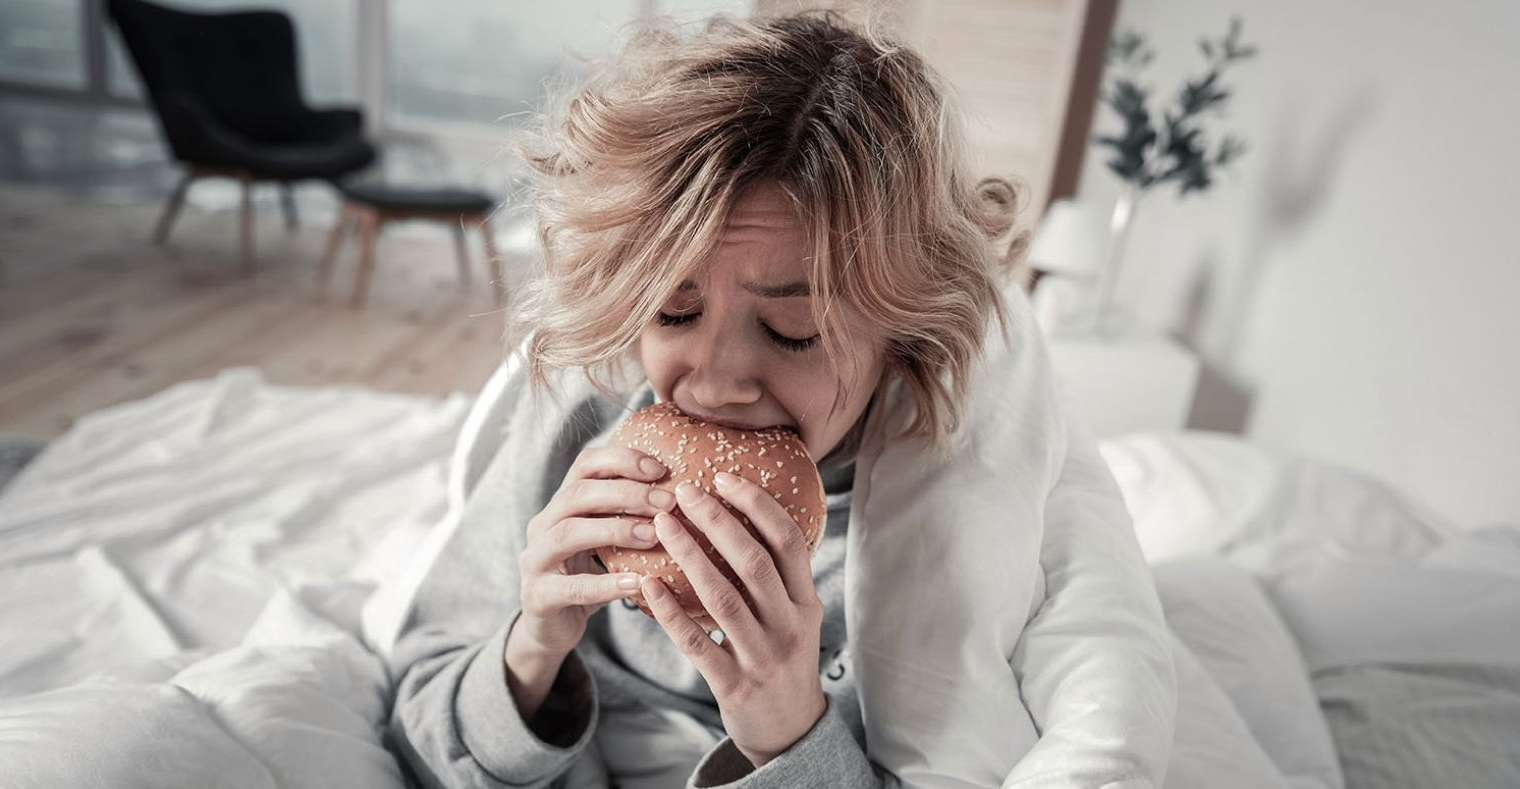 stress can cause eating disorders and depression